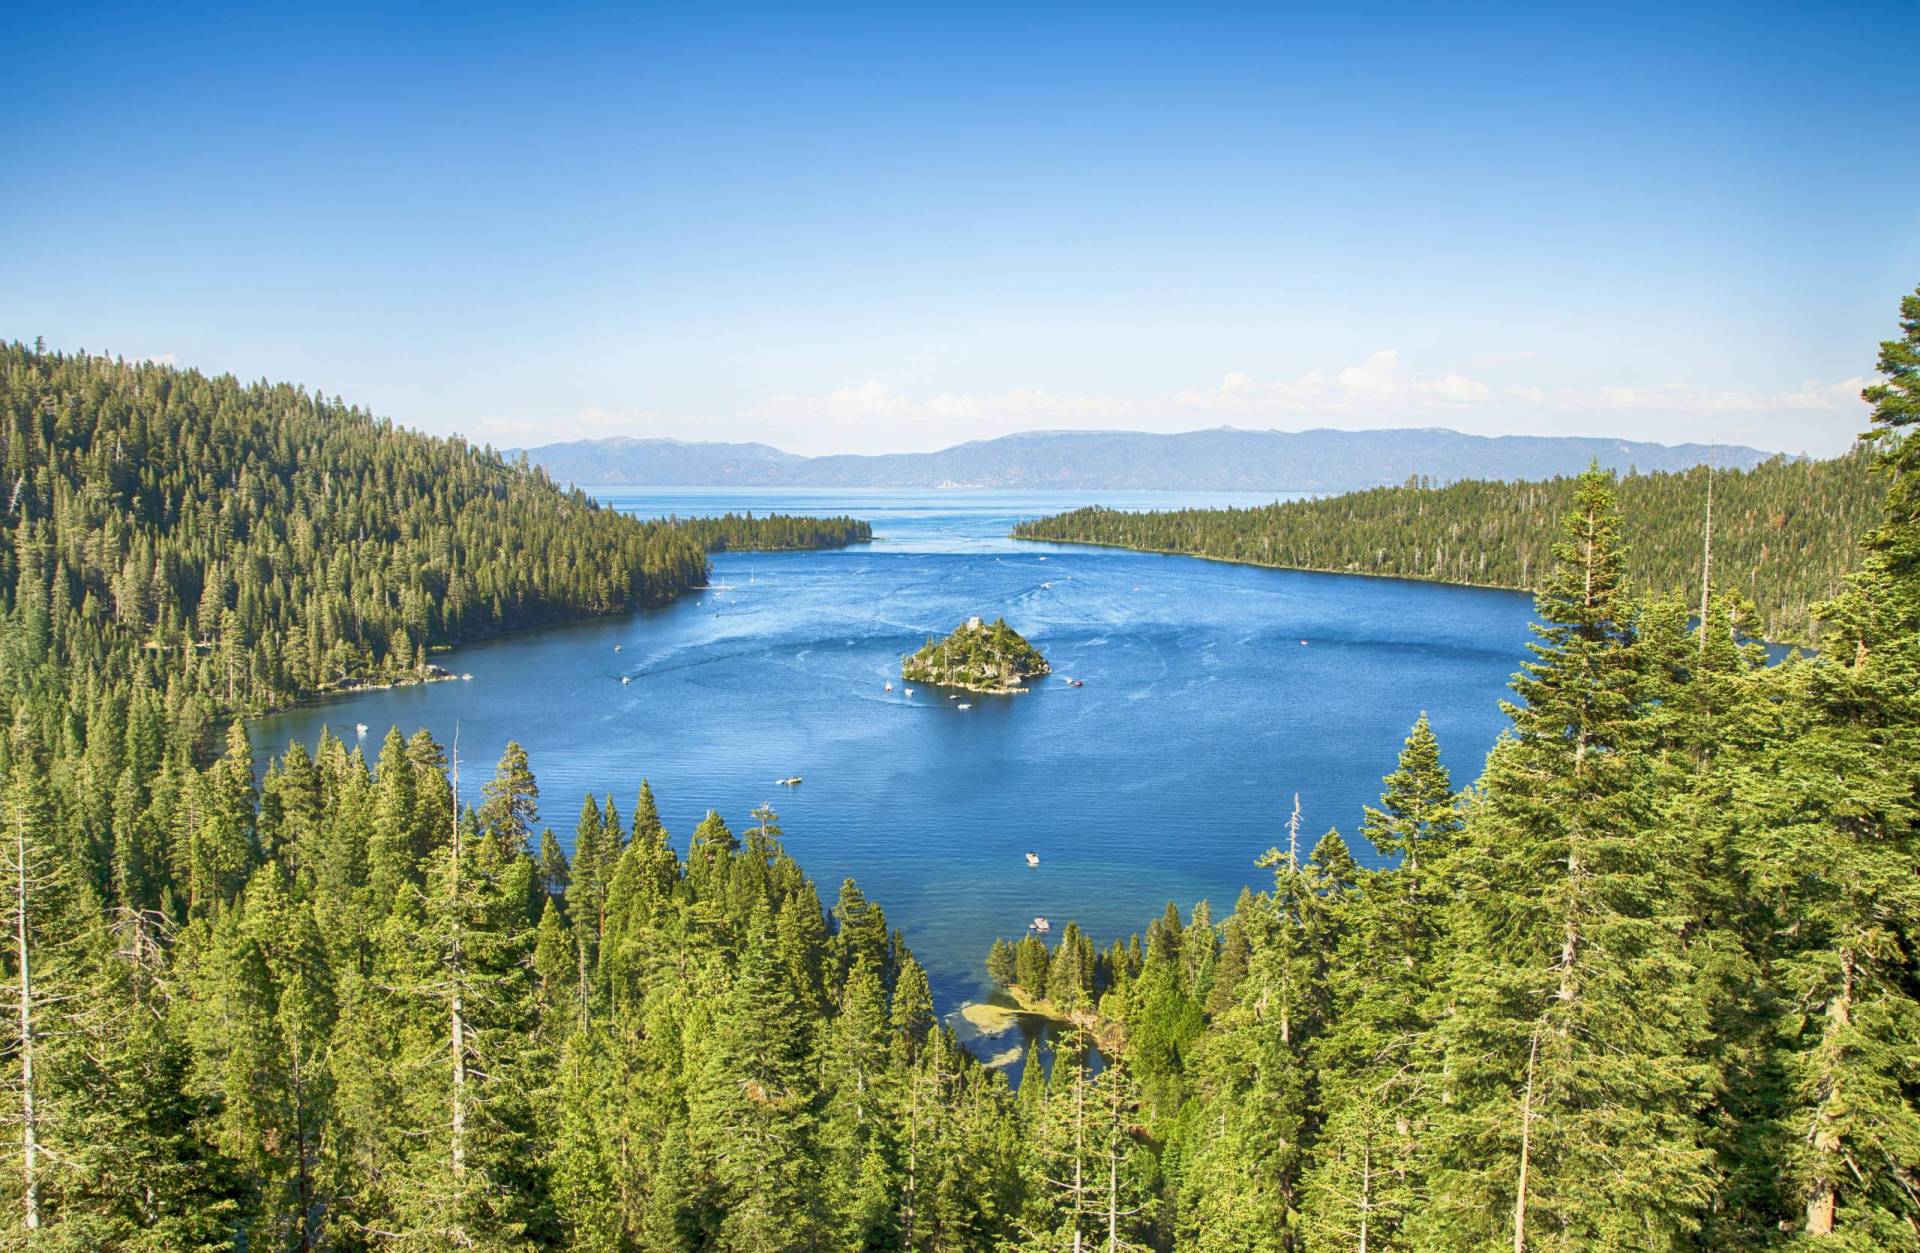 A gorgeous blue lake surrounded by green pine trees. A small green island sits in the center of the water.